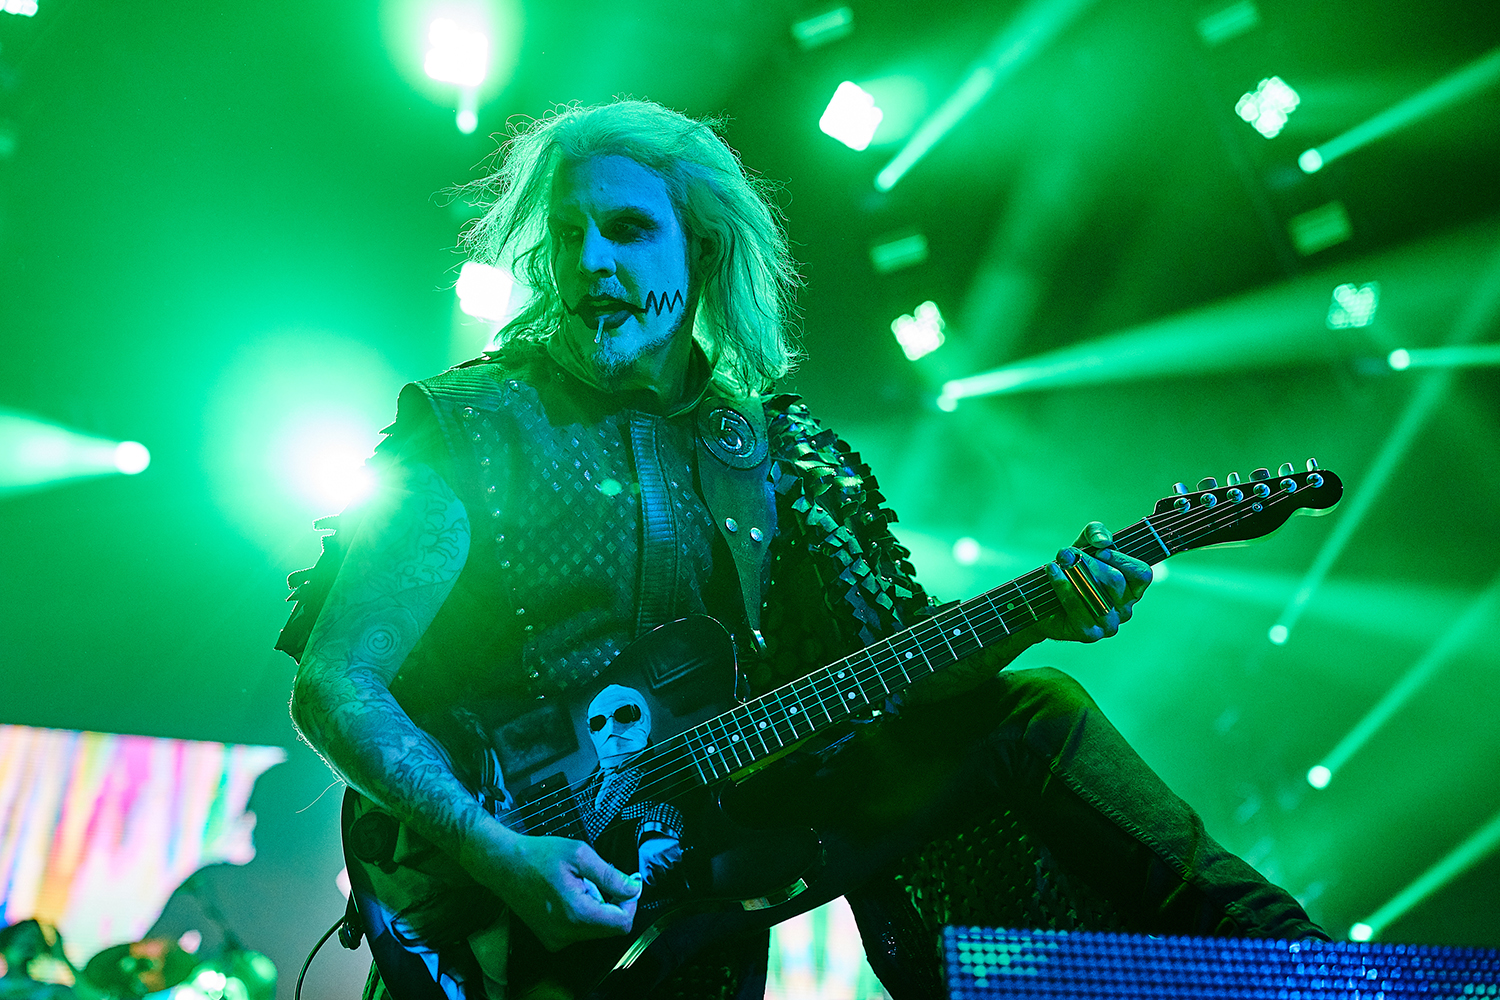  Rob Zombie's guitarist John 5 performs during a concert as part of the Twins of Evil Tour at the US Cellular Center in Cedar Rapids on Saturday, Aug. 10, 2019.  